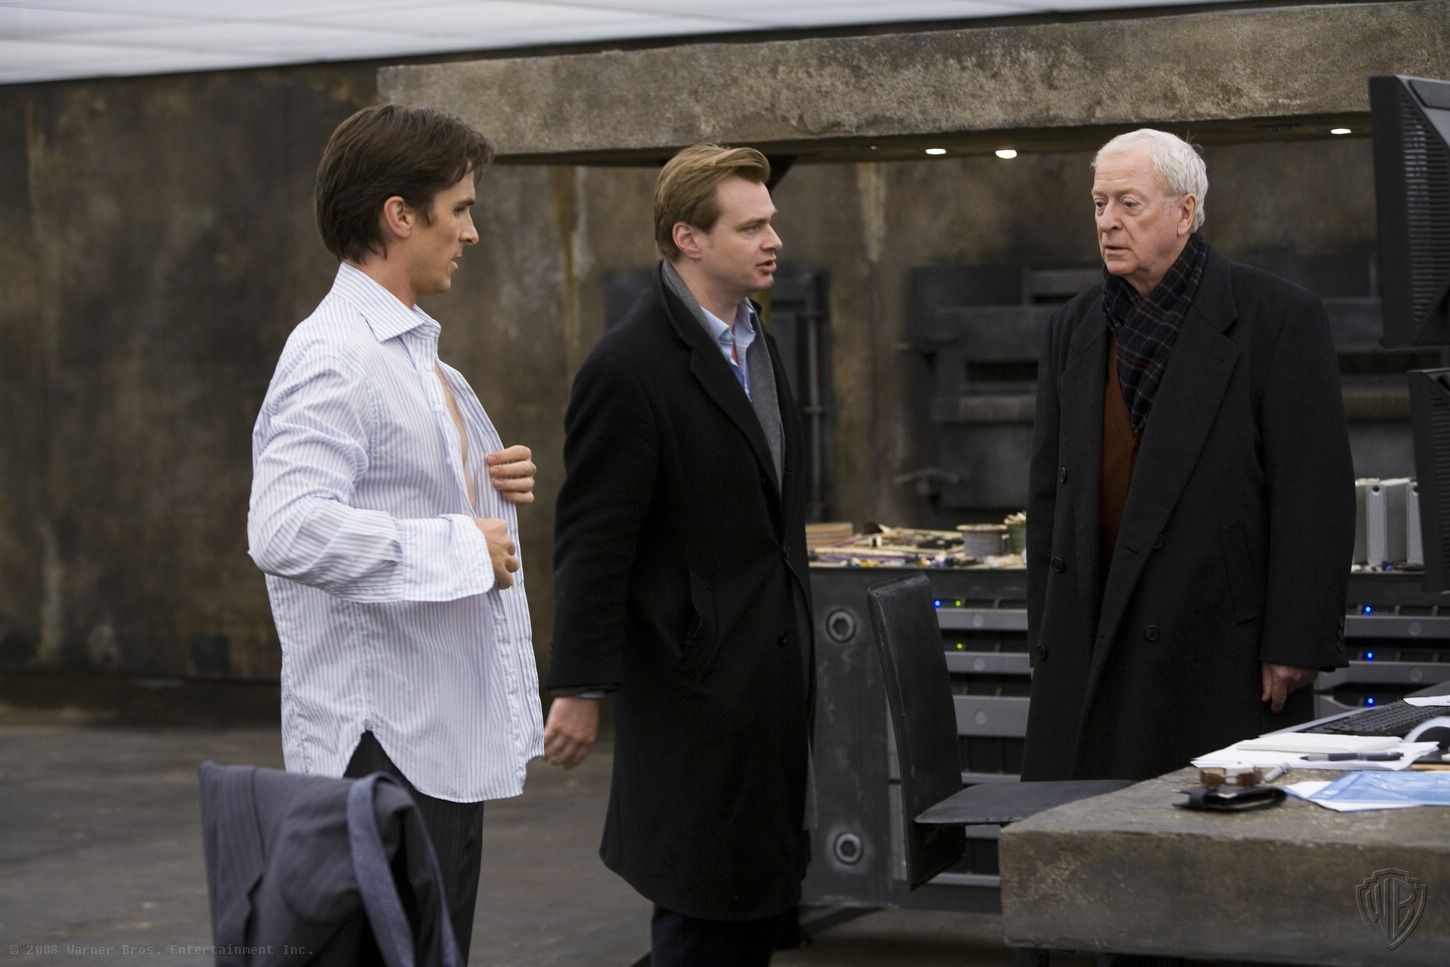 Christopher Nolan with Christian Bale and Michael Caine on The Dark Knight set